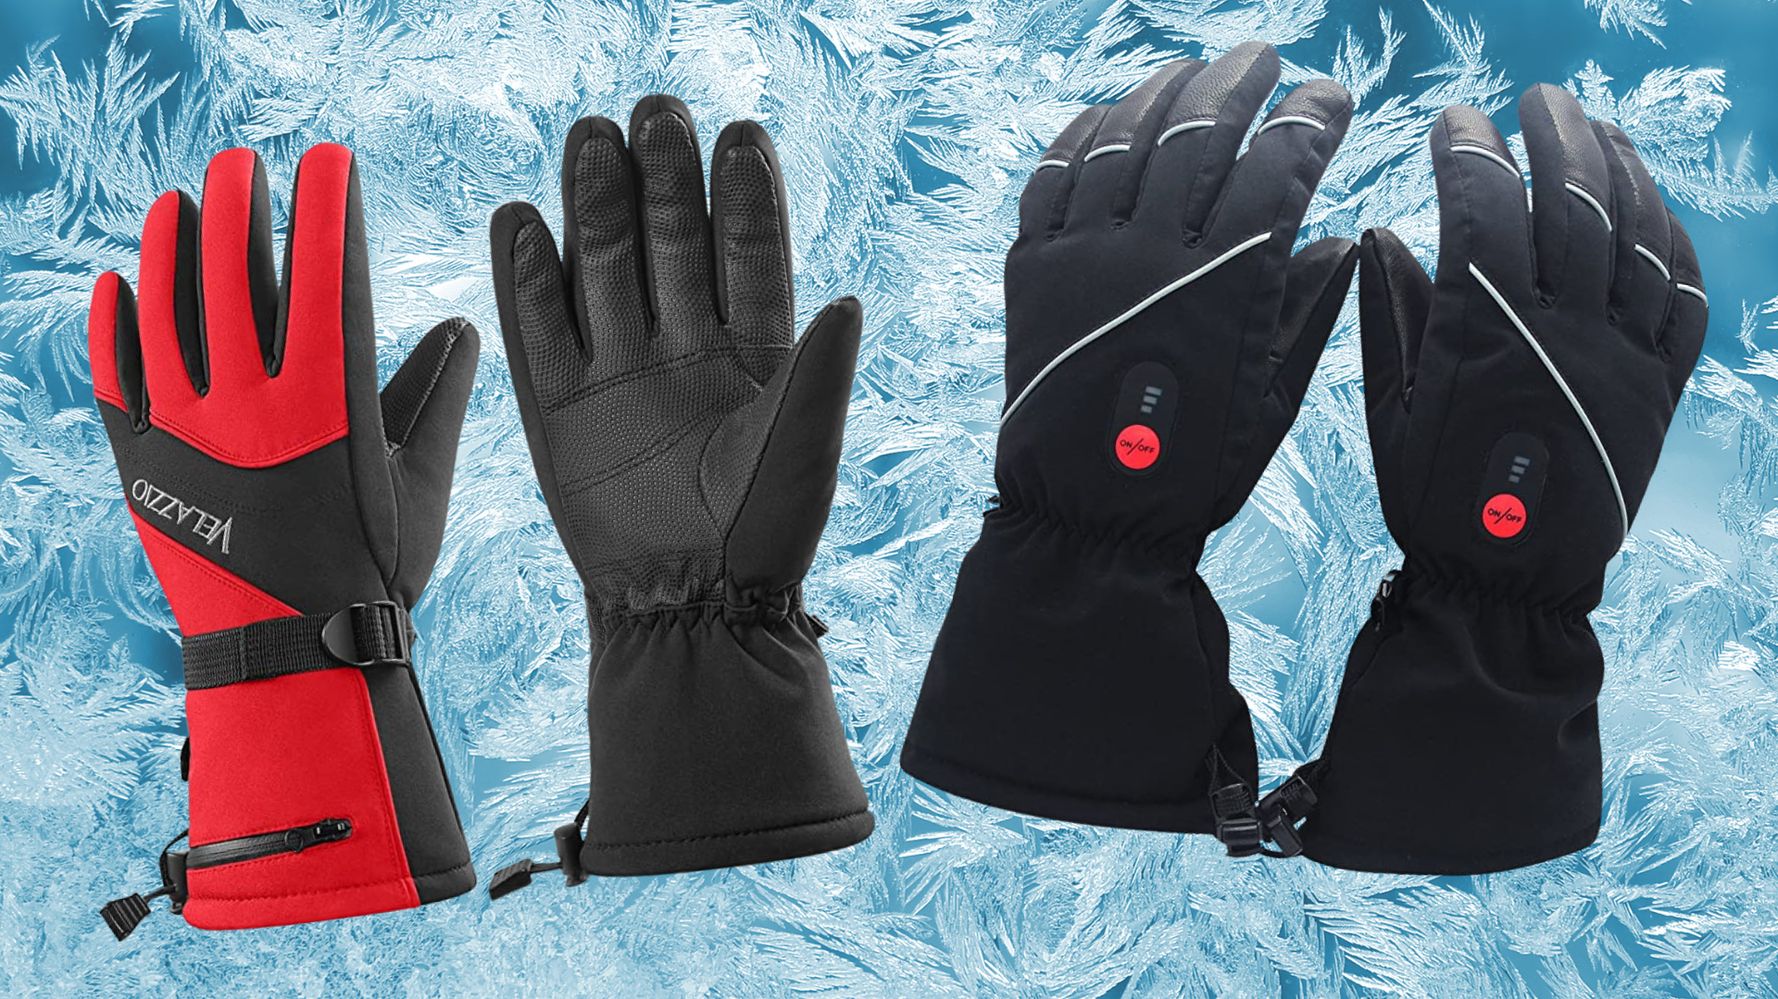 Breathable Work Gloves - Hand Protection, Stay Cool And Dry